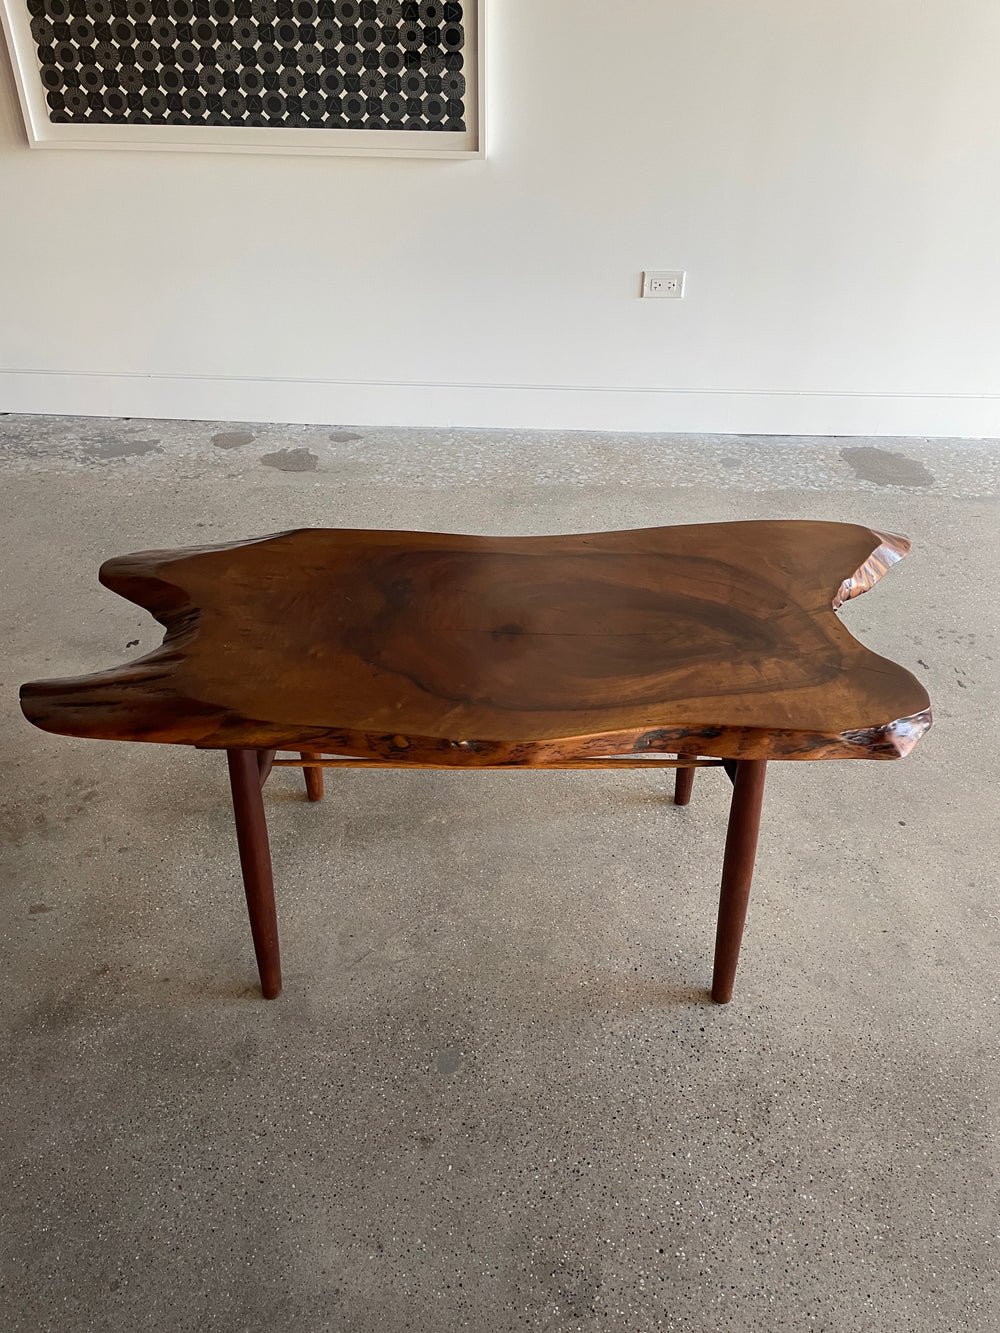 New Hope hand crafted coffee table after George Nakashima by Katherine Mezger, USA, 1960s